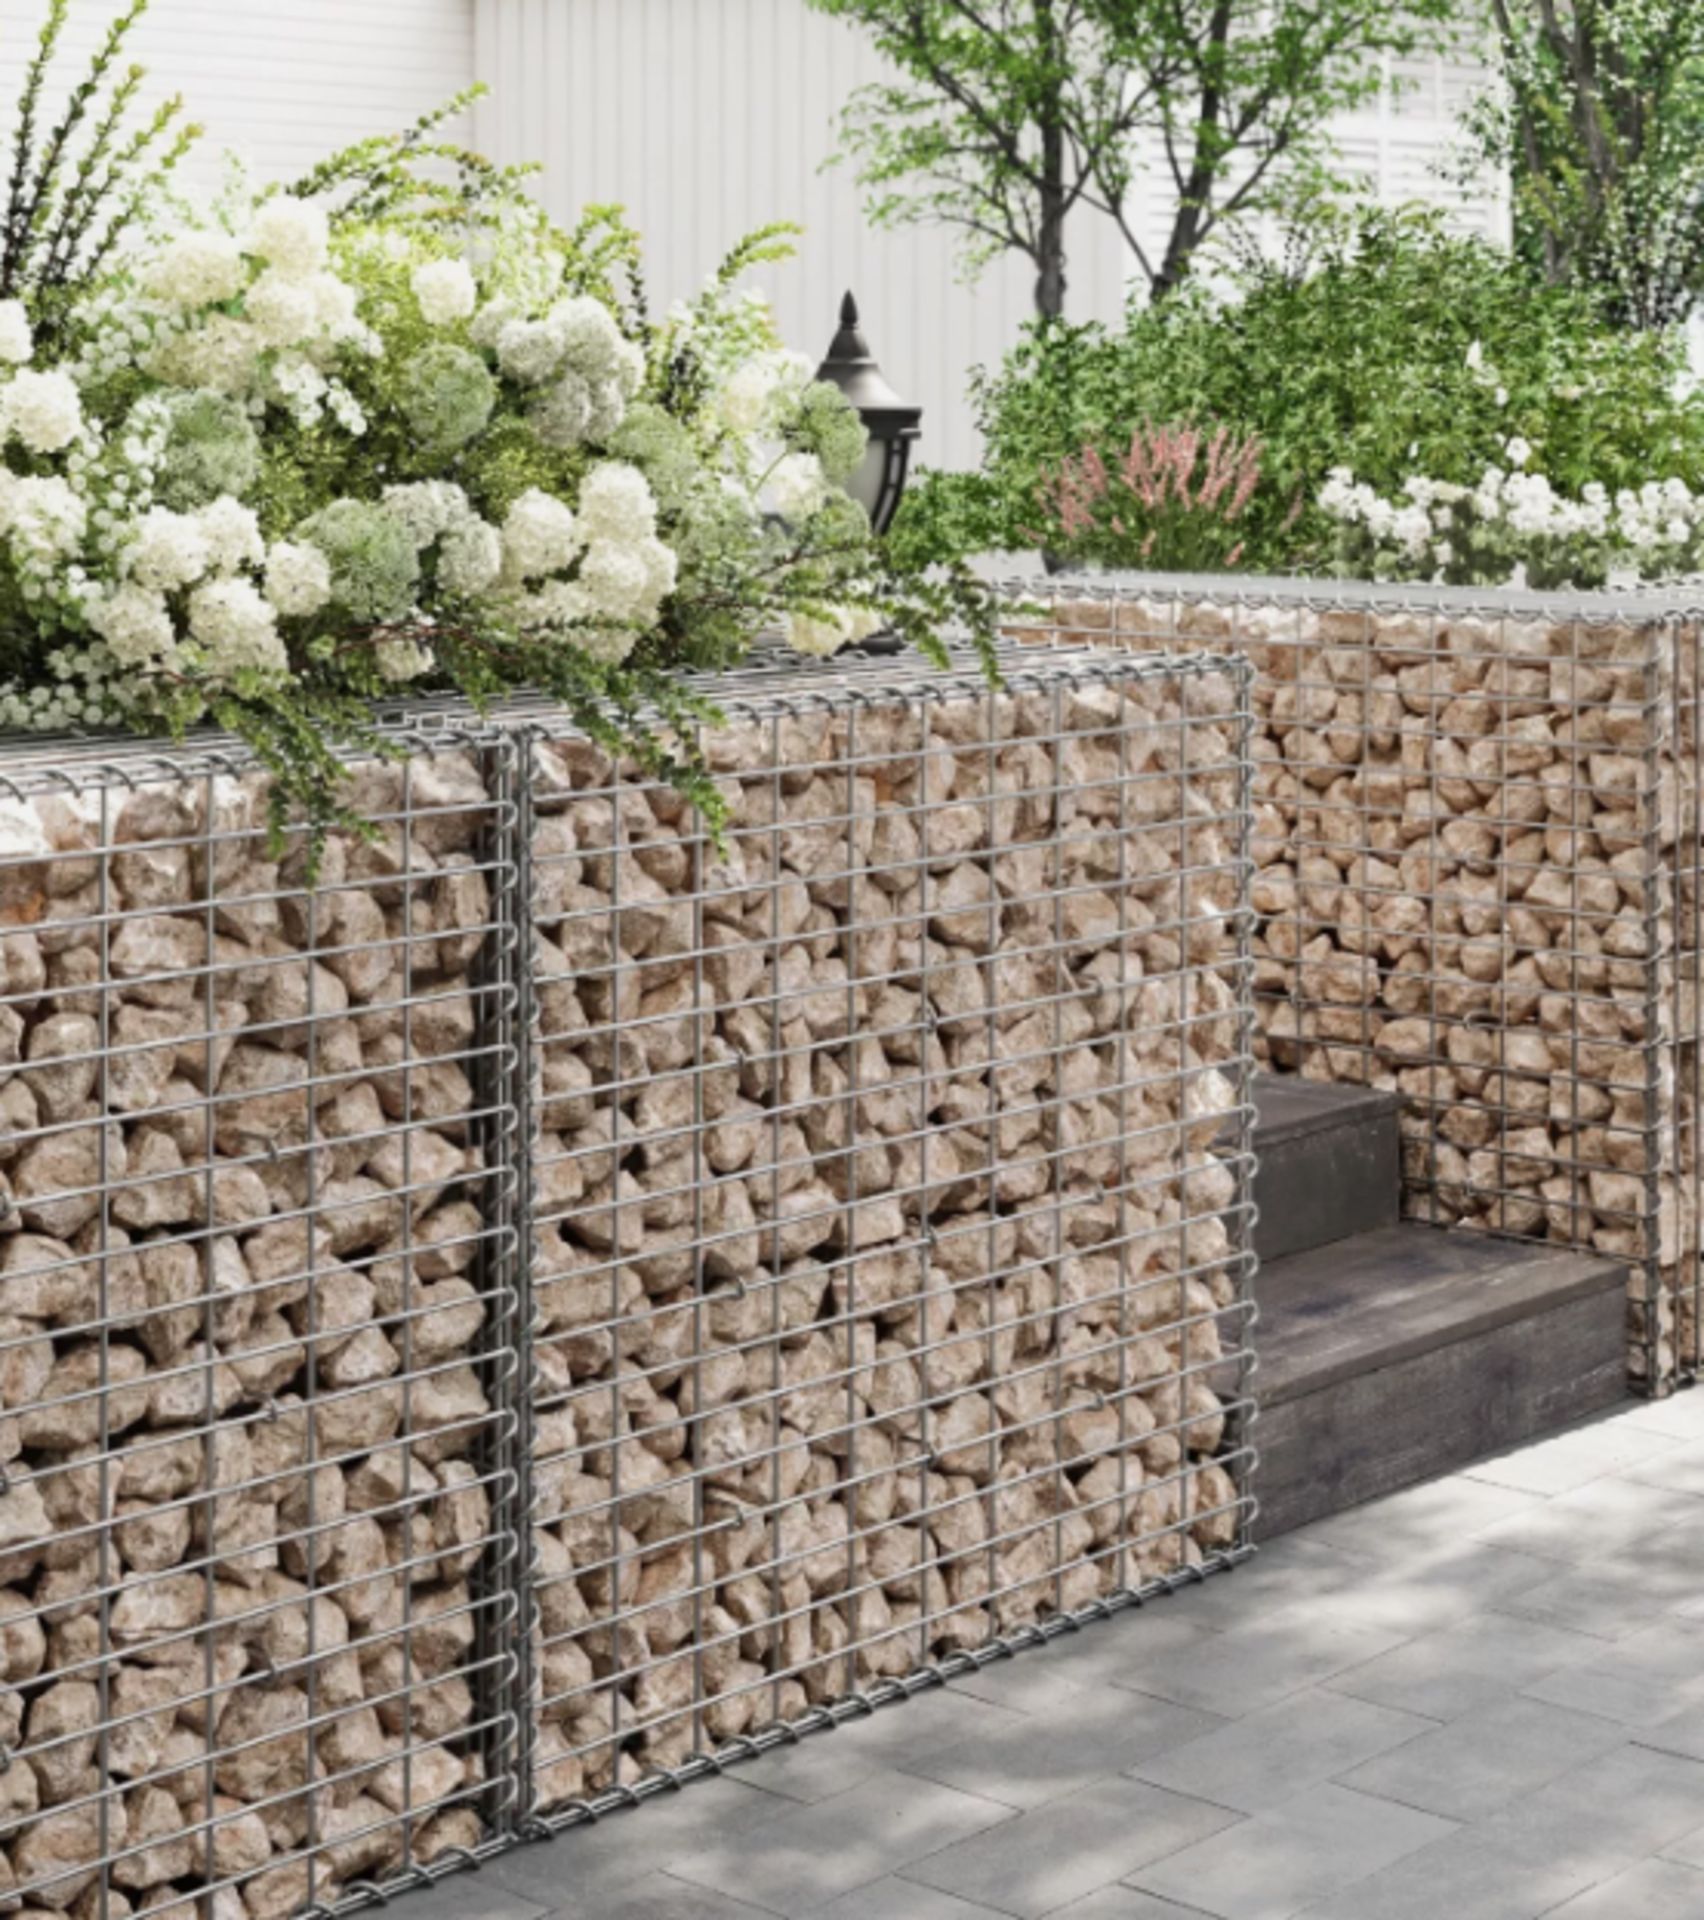 FREE DELIVERY - BRAND NEW ABION BASKETS GARDEN DECOR WALL PARTITION 100 X 90 X 30 CM SET - Image 2 of 2